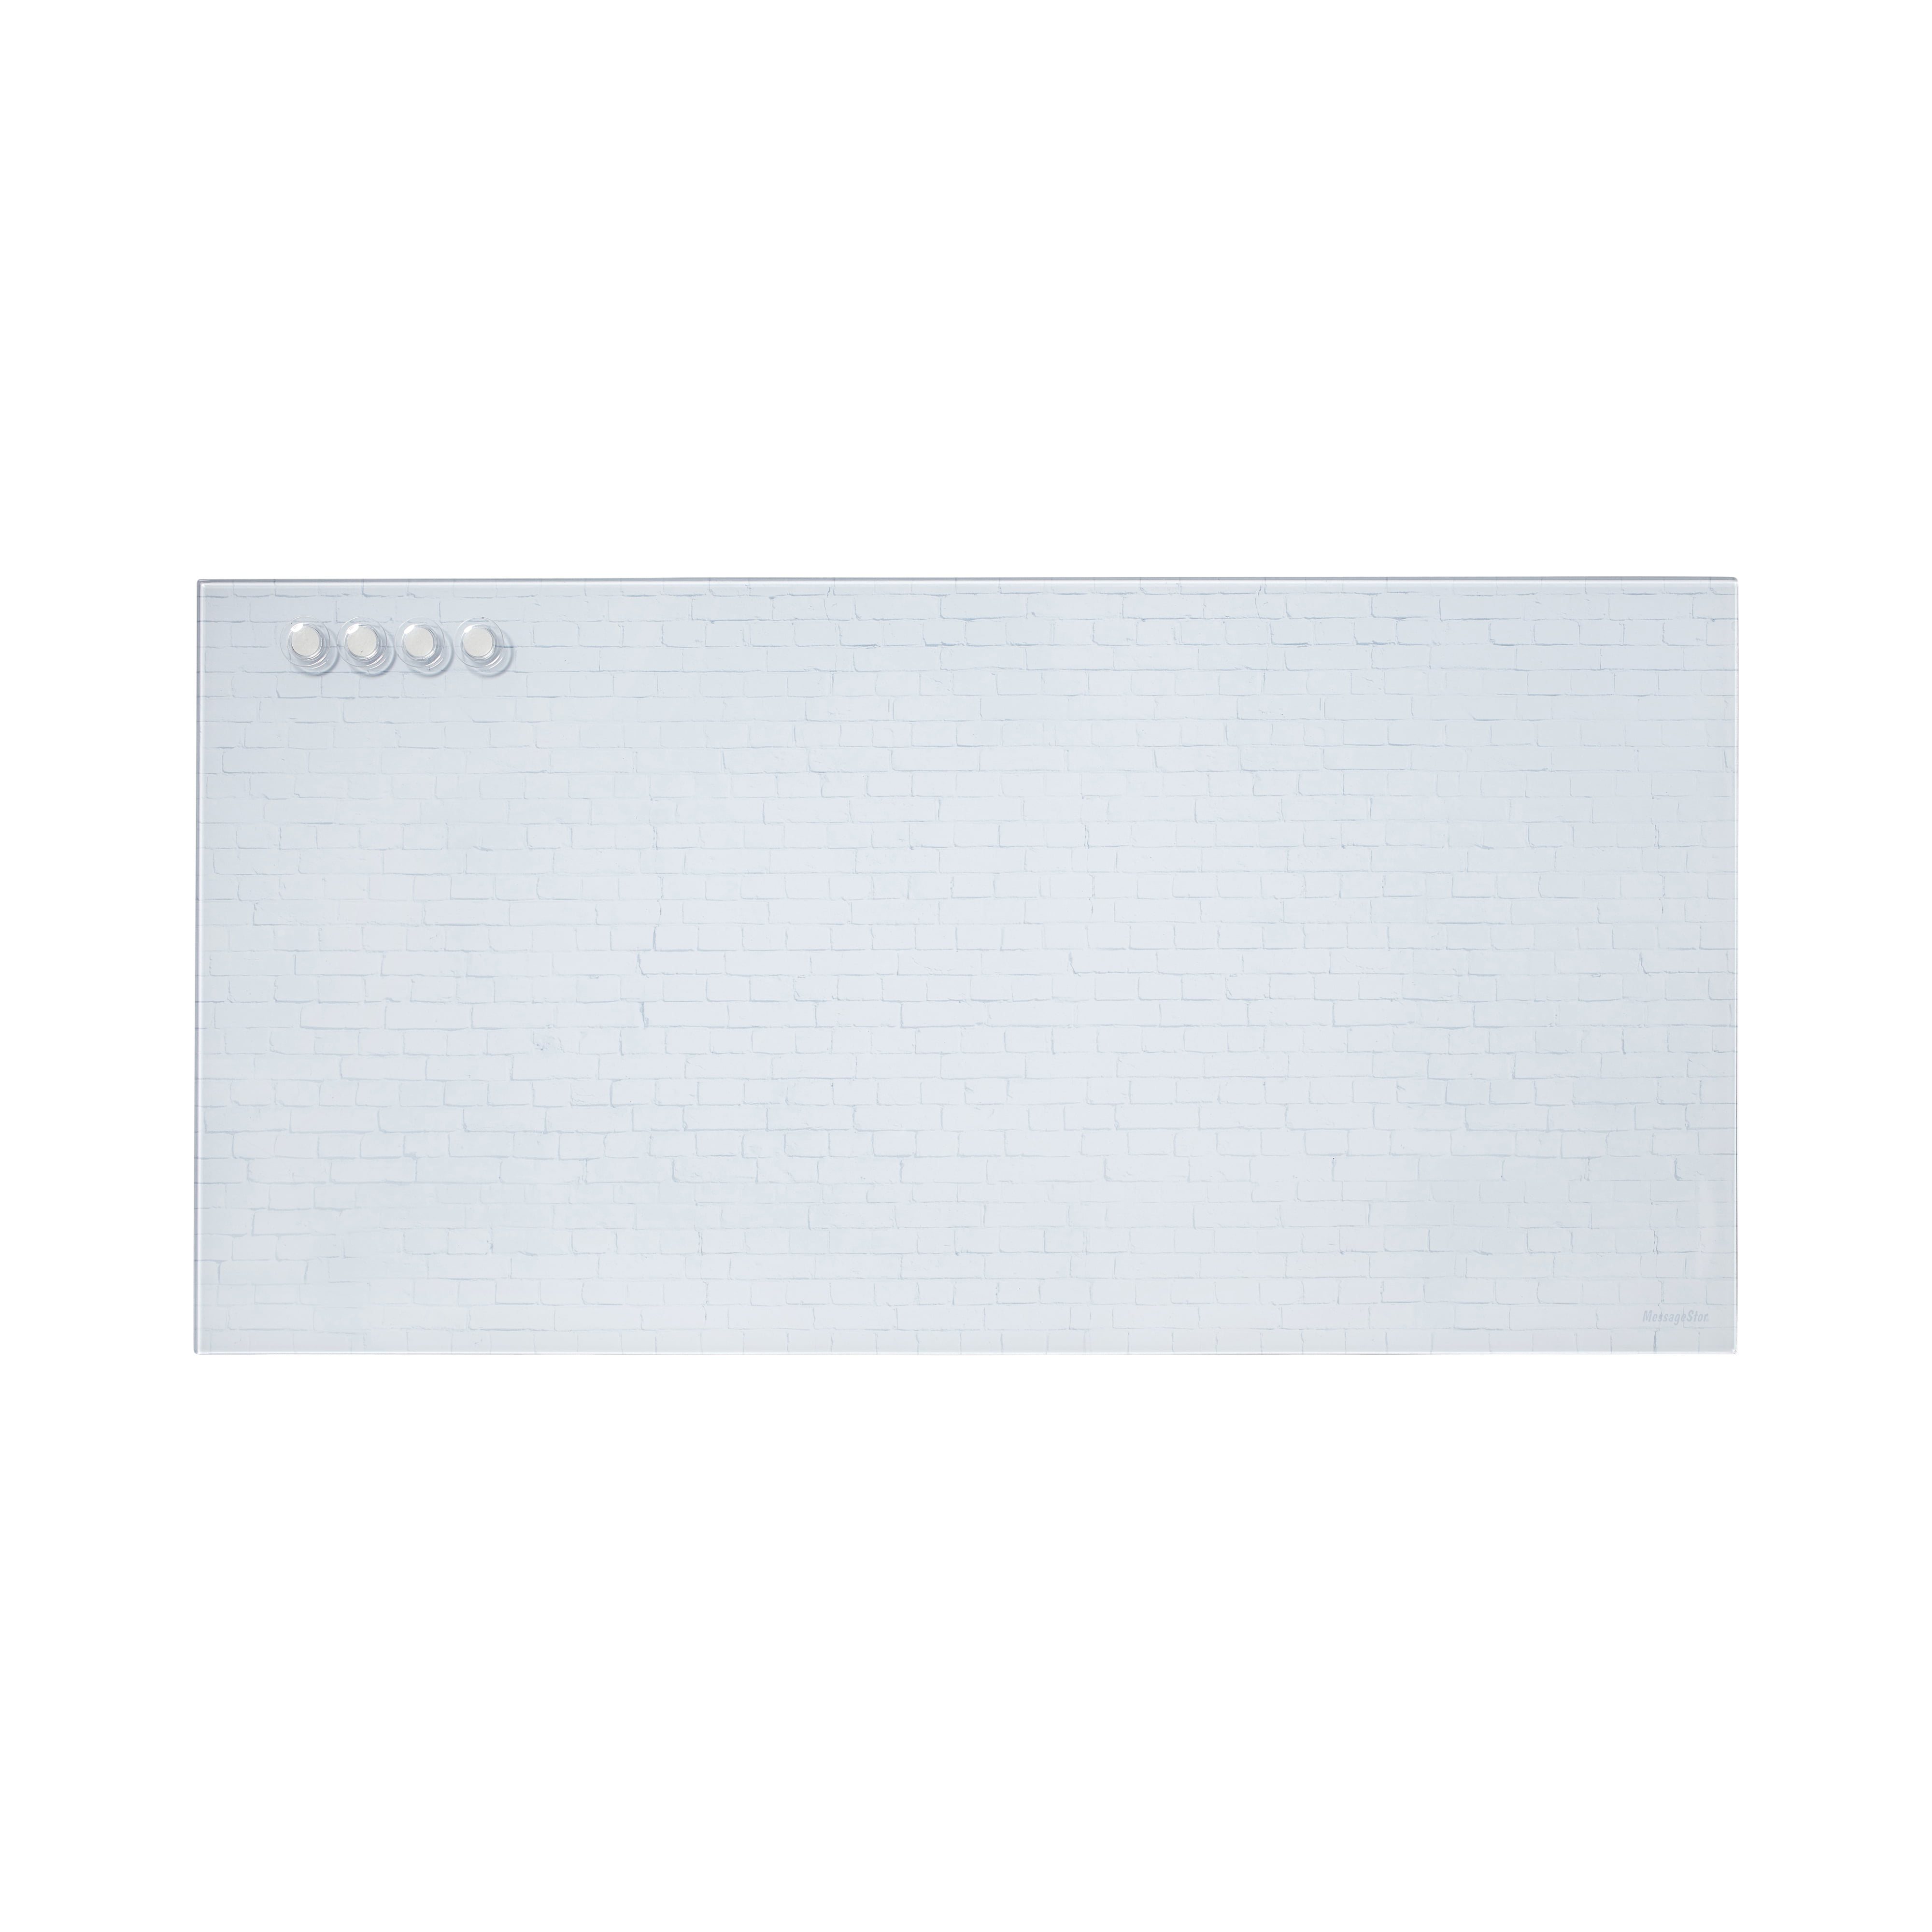 NEW Blank White Ceramic Dry Erase Message Board With Wire Hanger